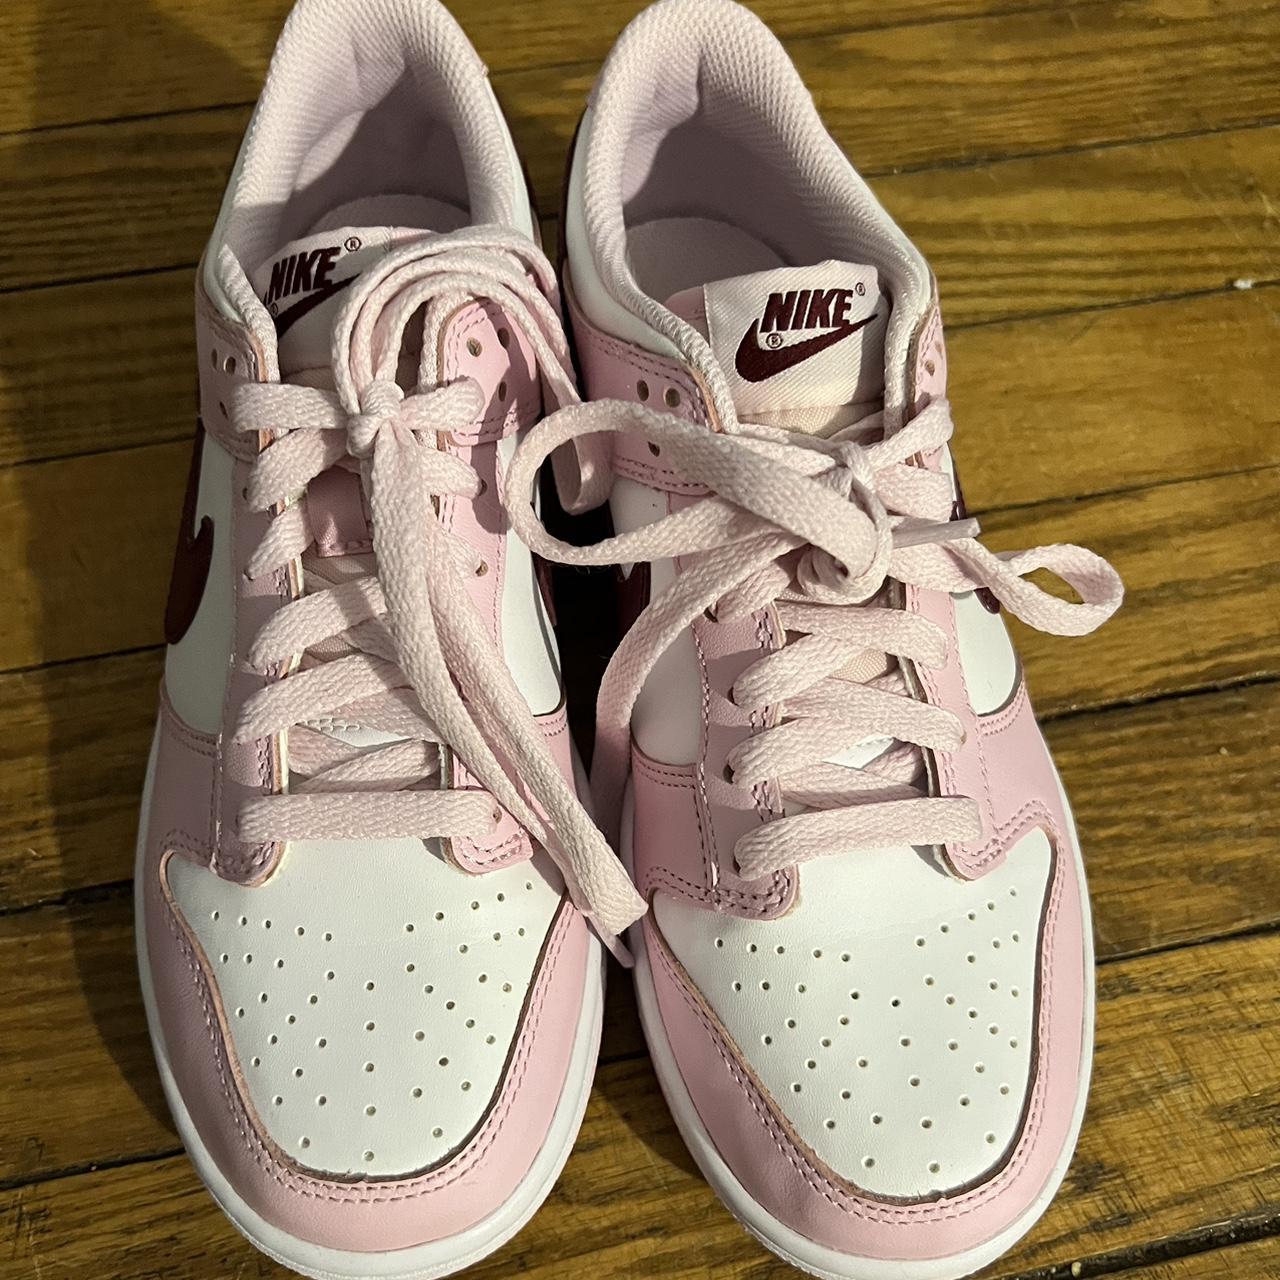 New/Never worn Vandy The Pink dunk in the rice - Depop